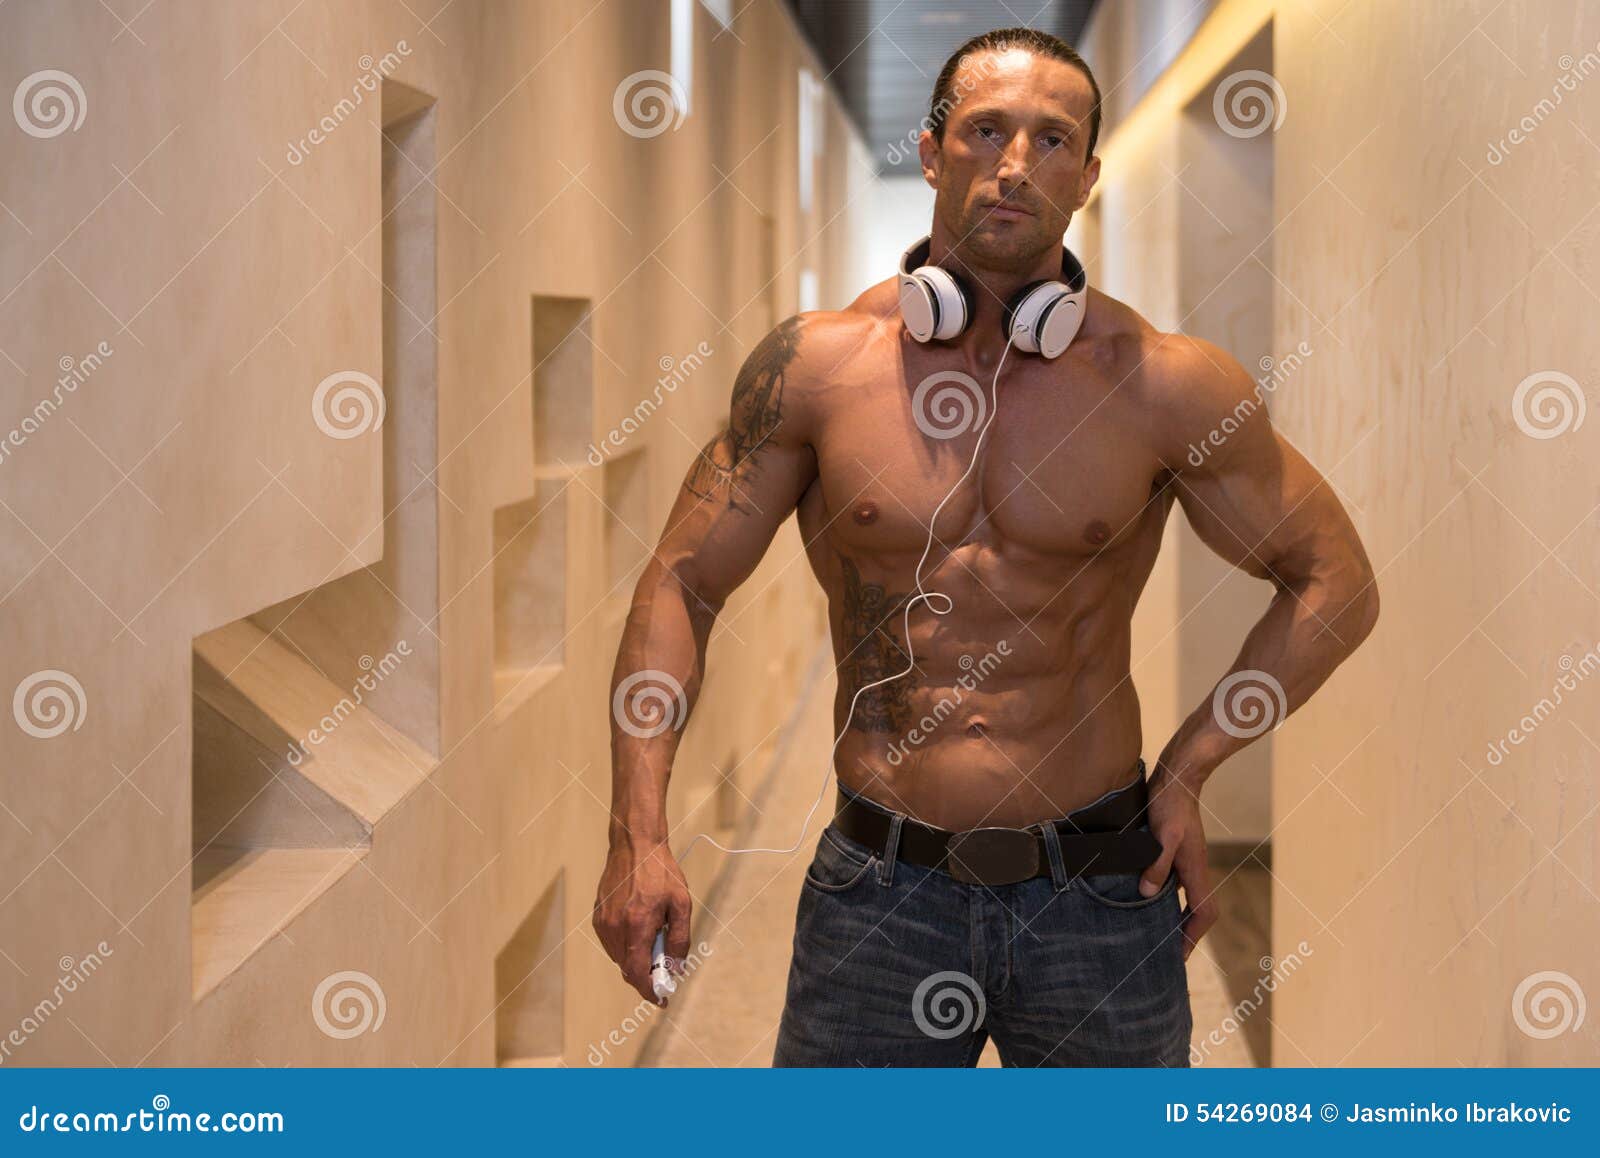 10,672 Aesthetic Body Male Images, Stock Photos, 3D objects, & Vectors |  Shutterstock